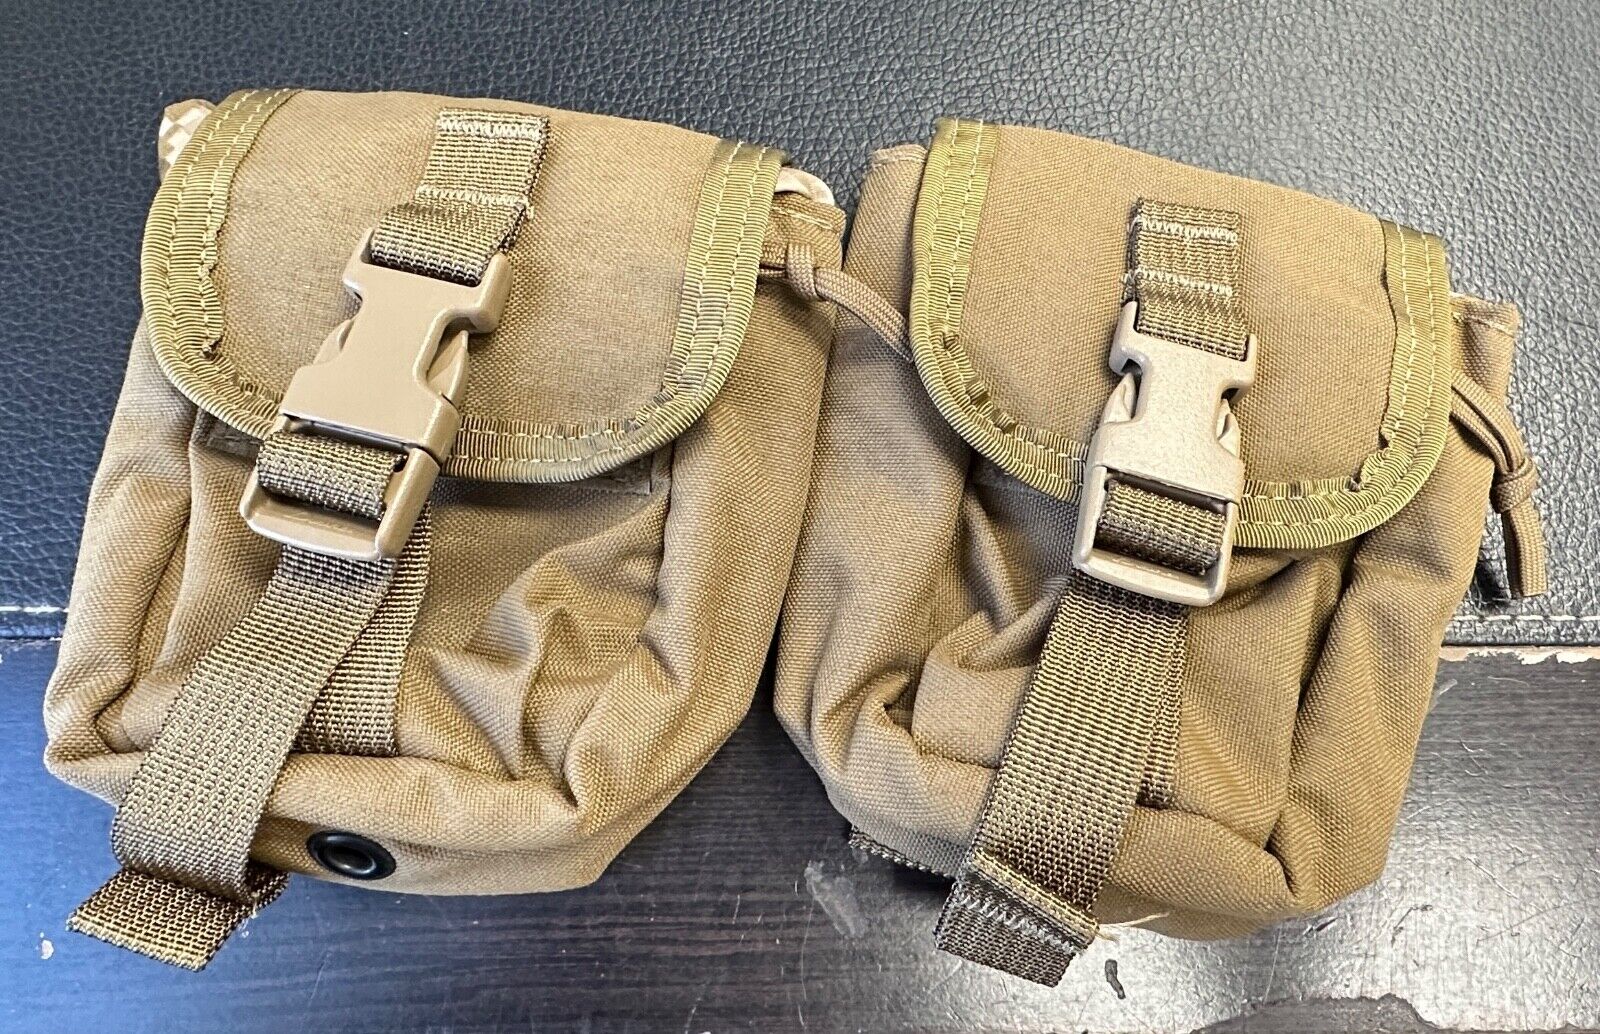 LBT USMC ISSUE SMALL UTILITY POUCH COYOTE NEW (2 EACH)